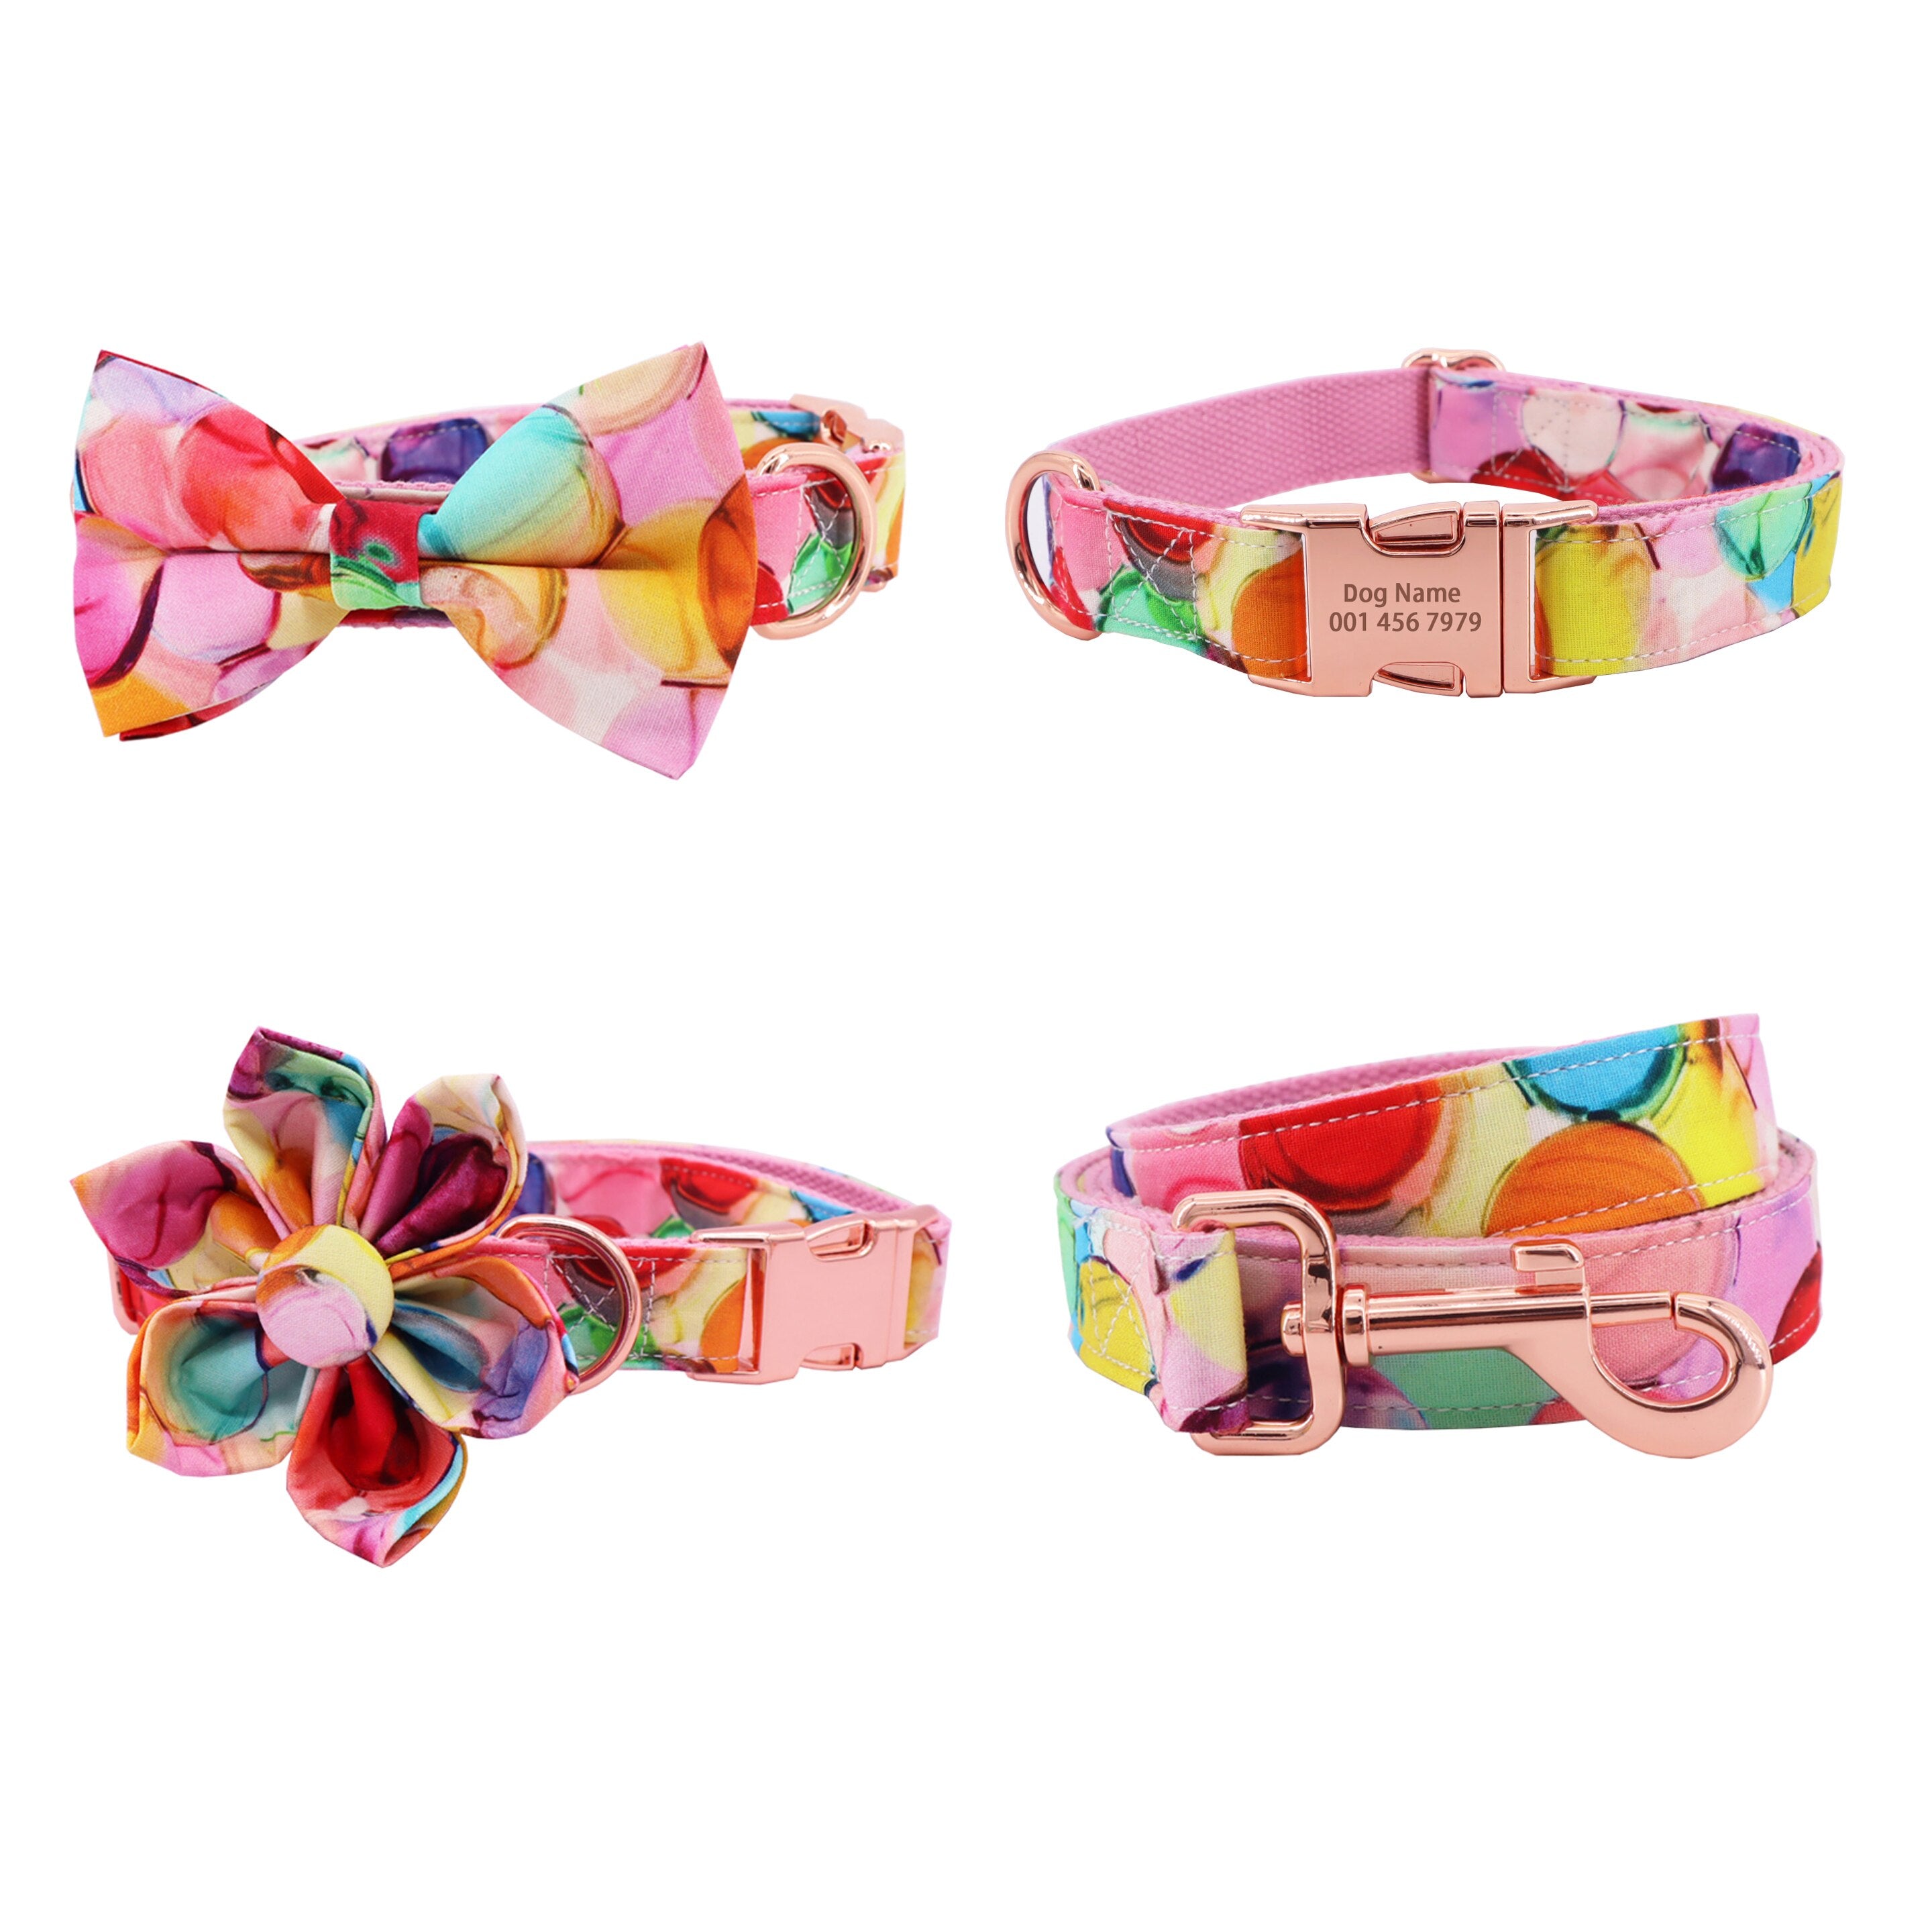 Personalized Bubble Dog Flower Collar & Leash